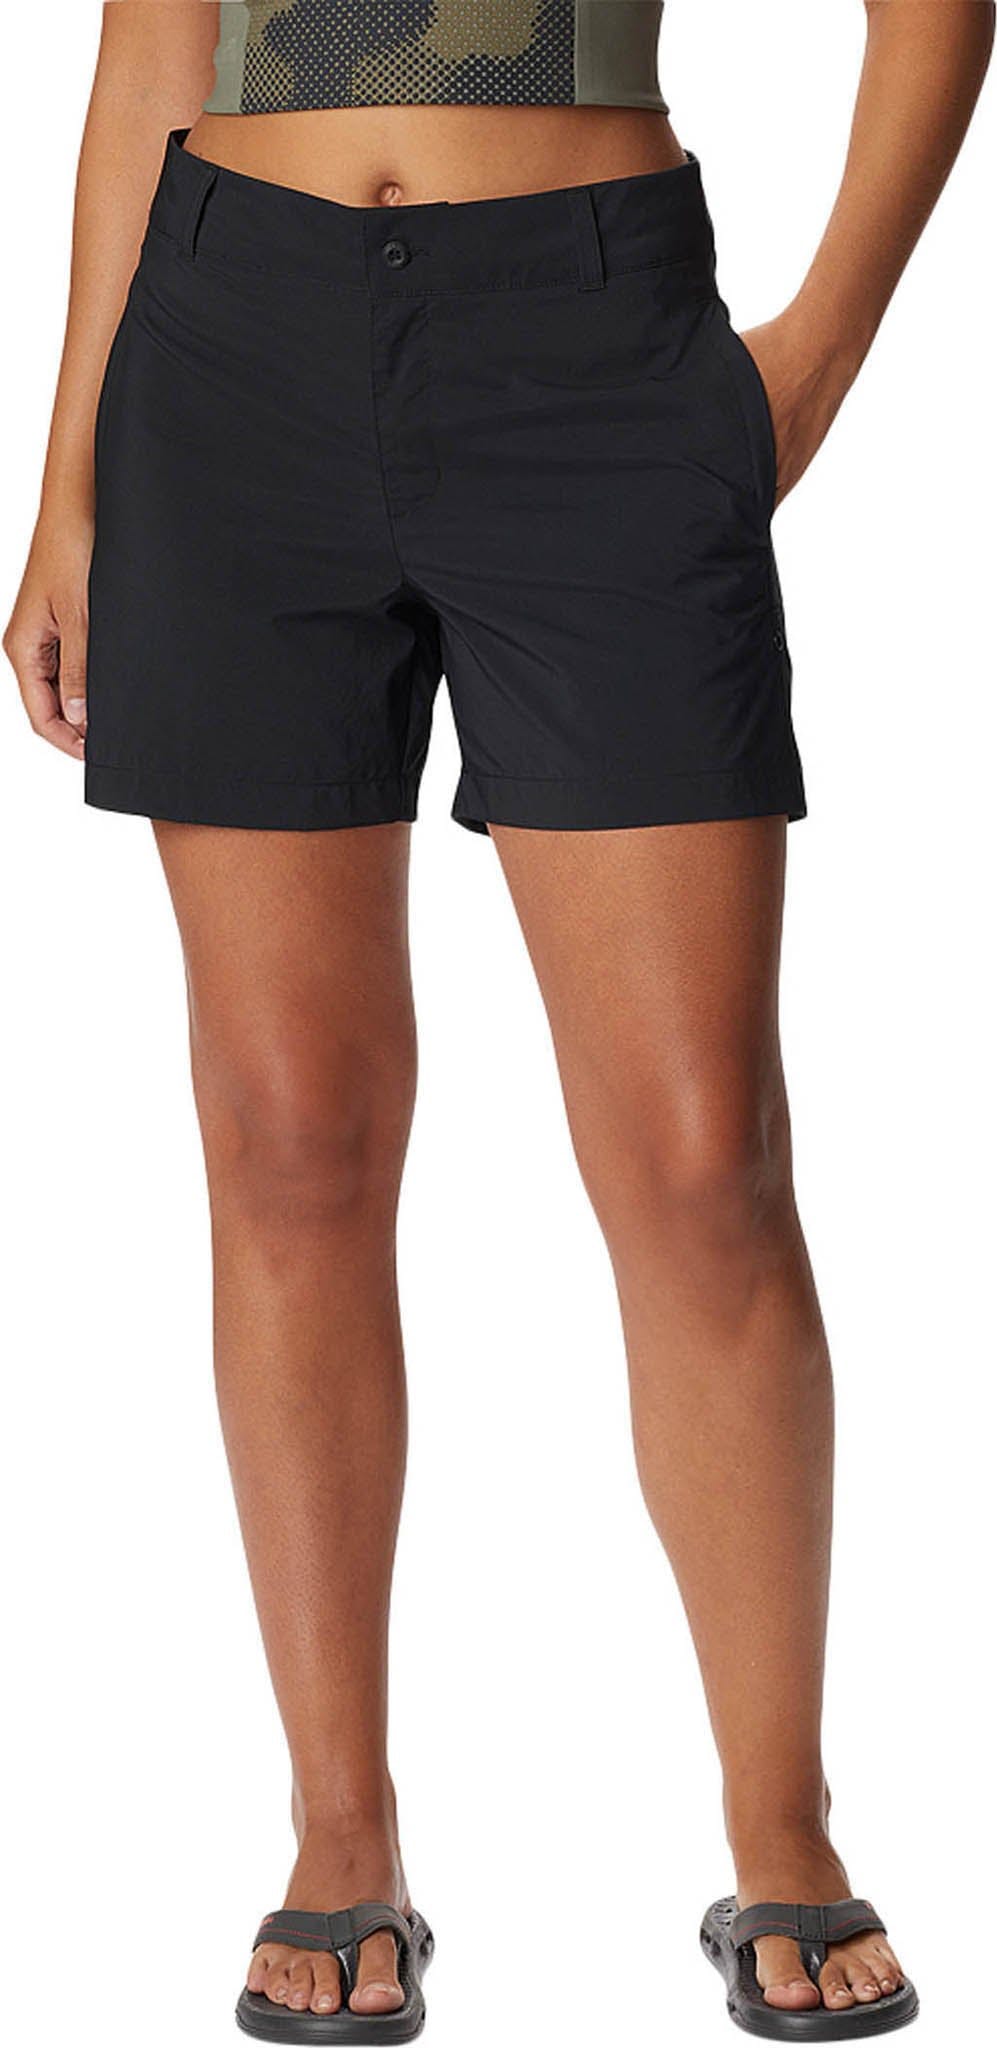 Product image for Silver Ridge Utility™ Short - Women's